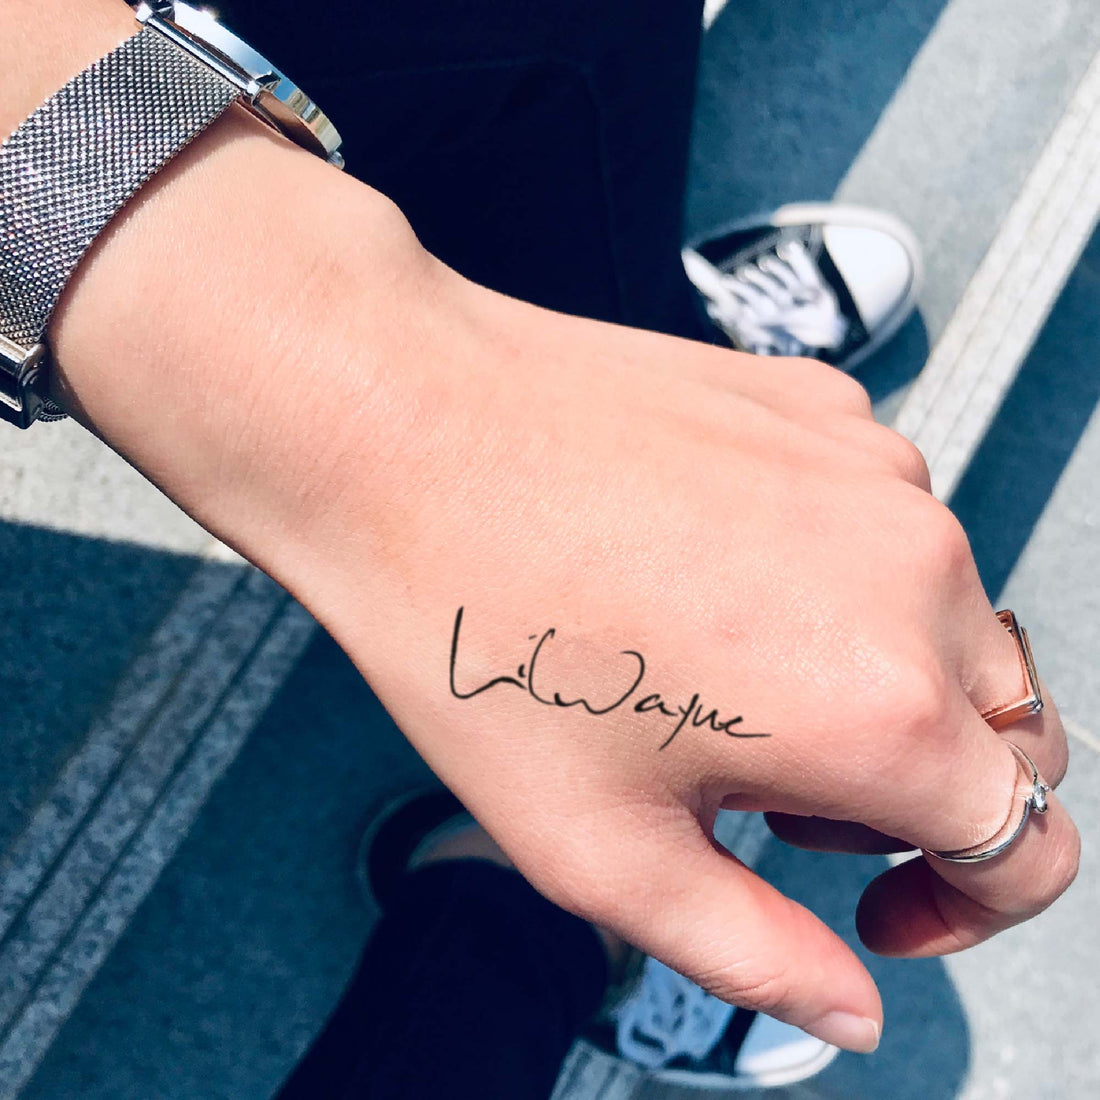 Lil Wayne custom temporary tattoo sticker design idea inspiration meanings removal arm wrist hand words font name signature calligraphy lyrics tour concert outfits merch accessory gift souvenir costumes wear dress up code